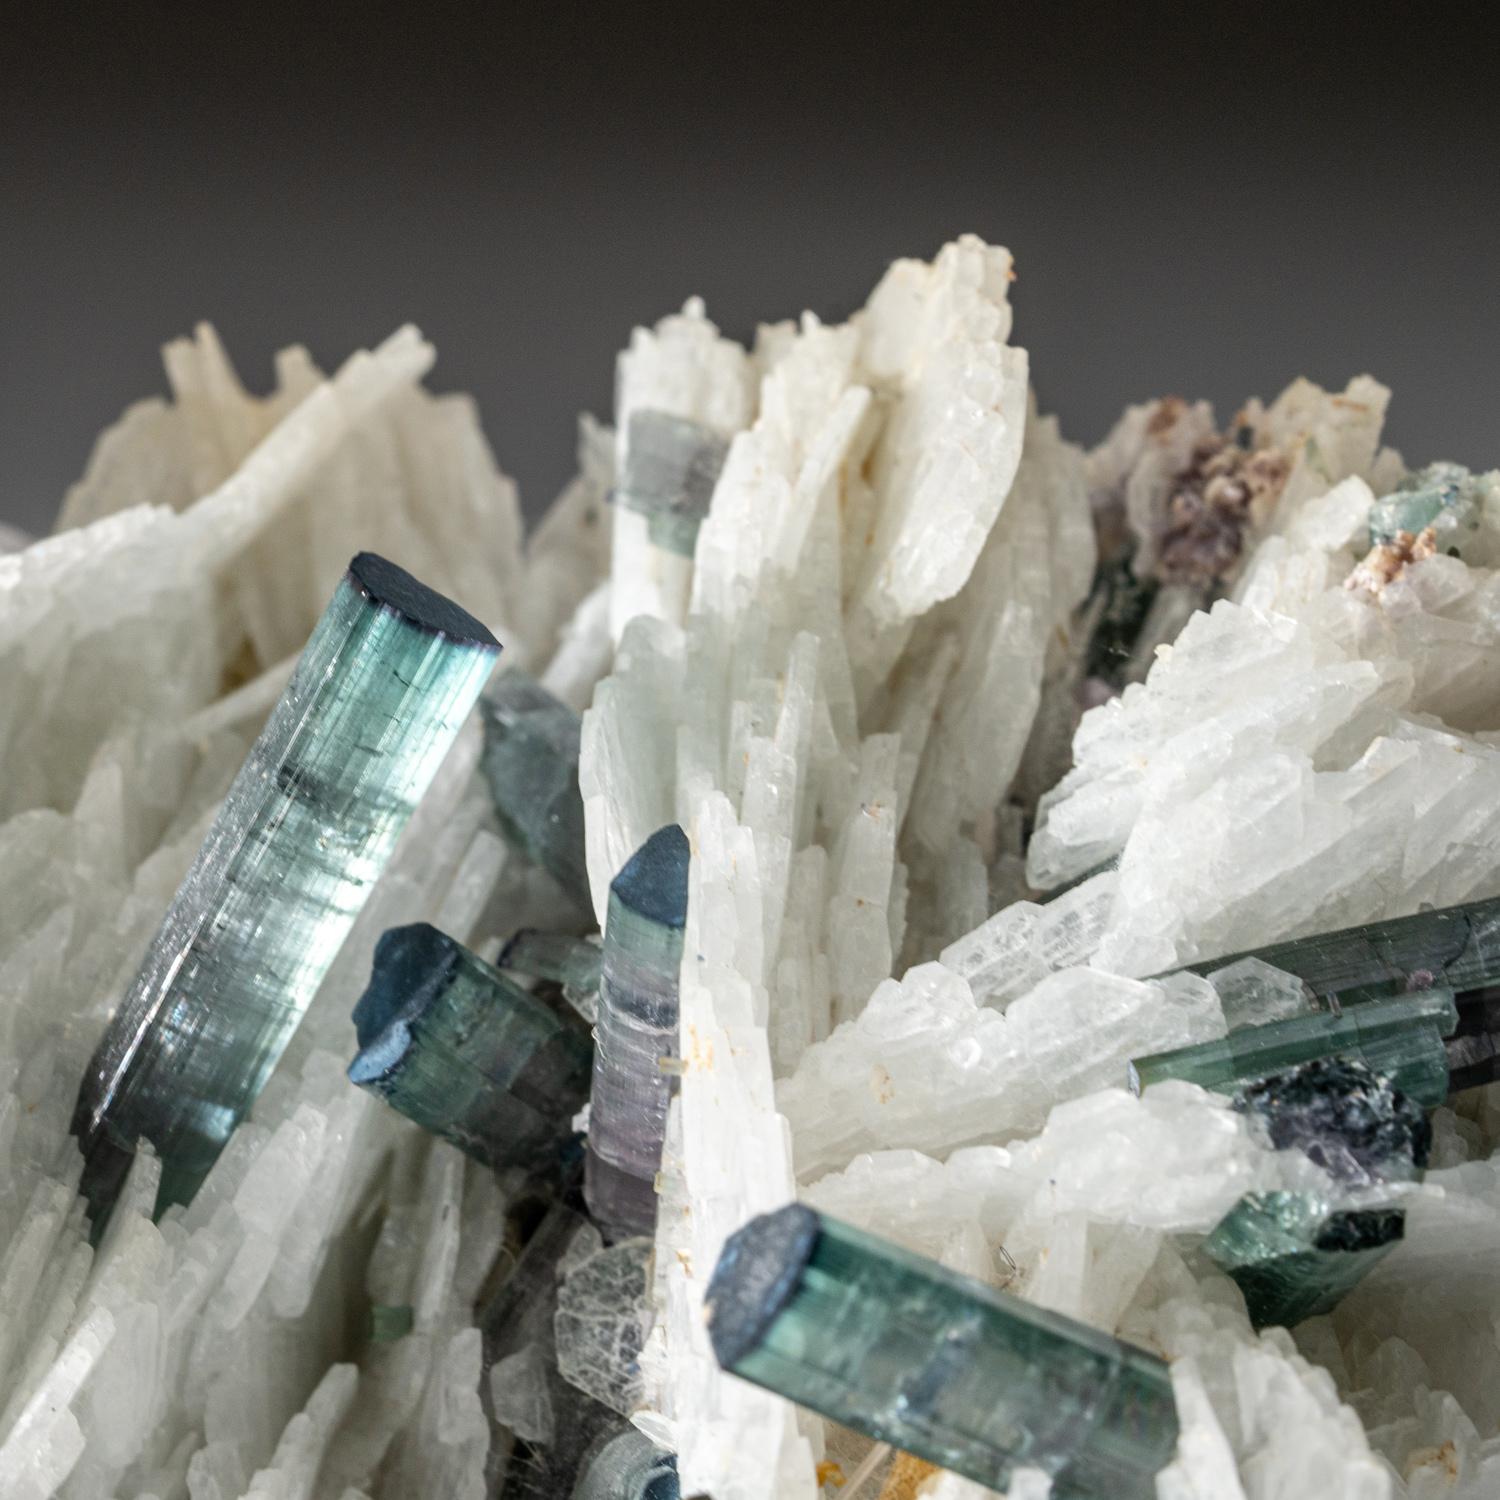 From Skardu Area, Baltistan, Gilgit-Baltistan, Pakistan
 
Rare unusual radial crystal formation of gem transparent indicolite var. blue tourmaline crystals with blades of white albite. The tourmaline has rich blue color throughout with lustrous